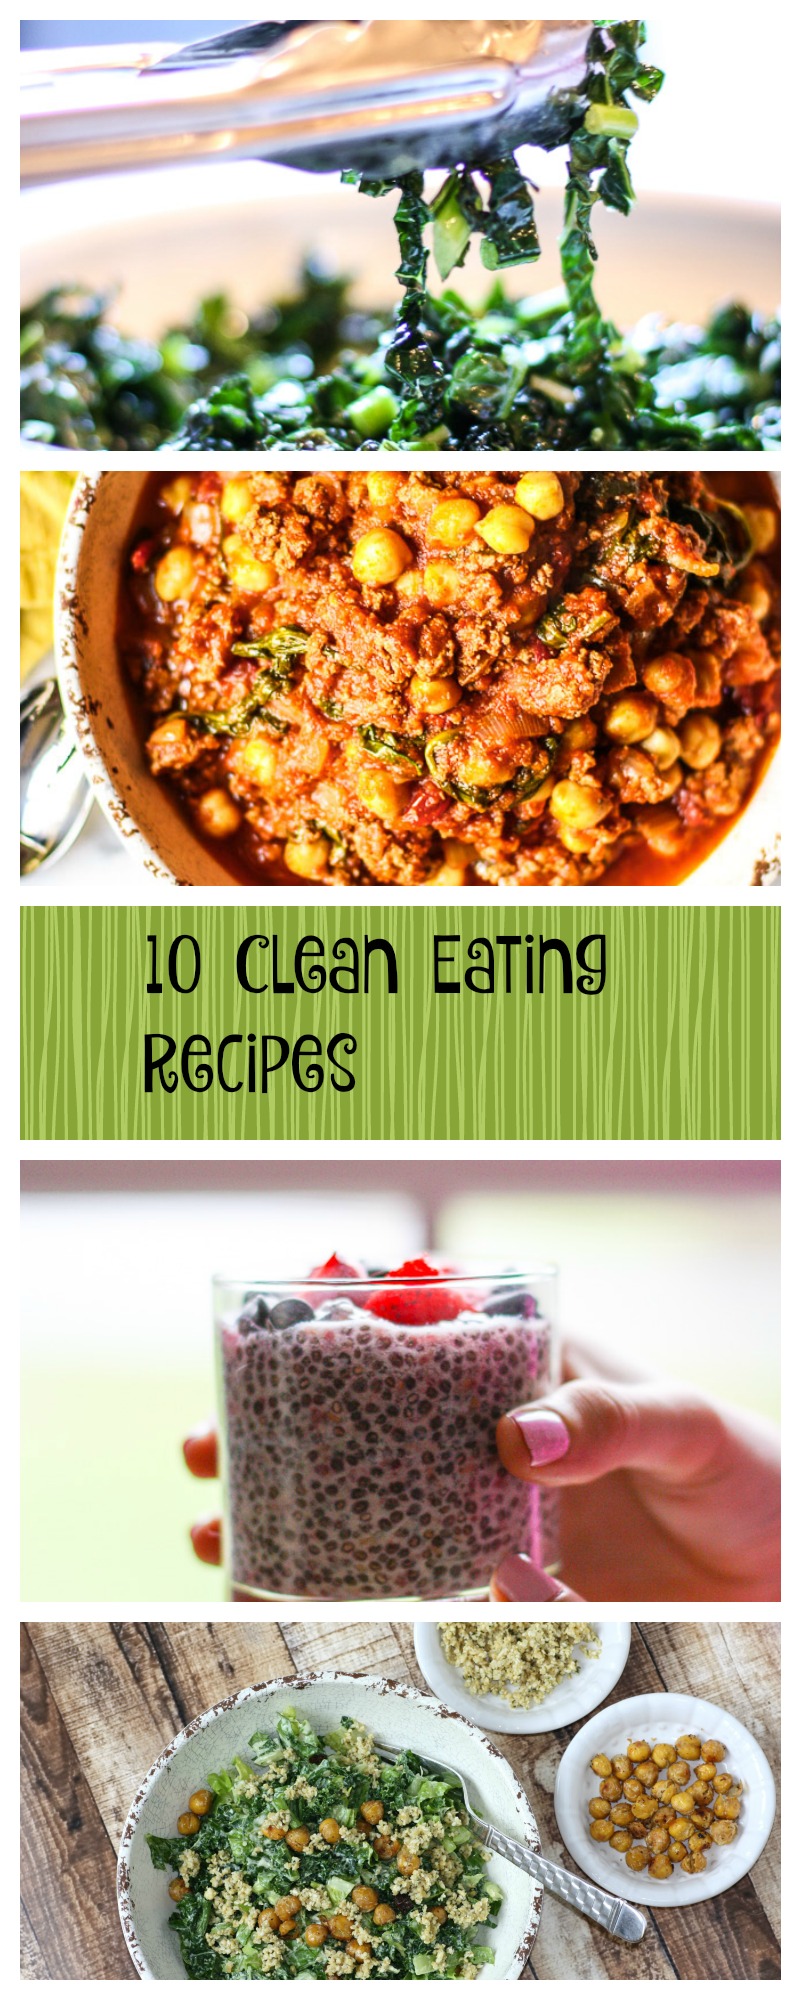 10 Clean Eating Recipes